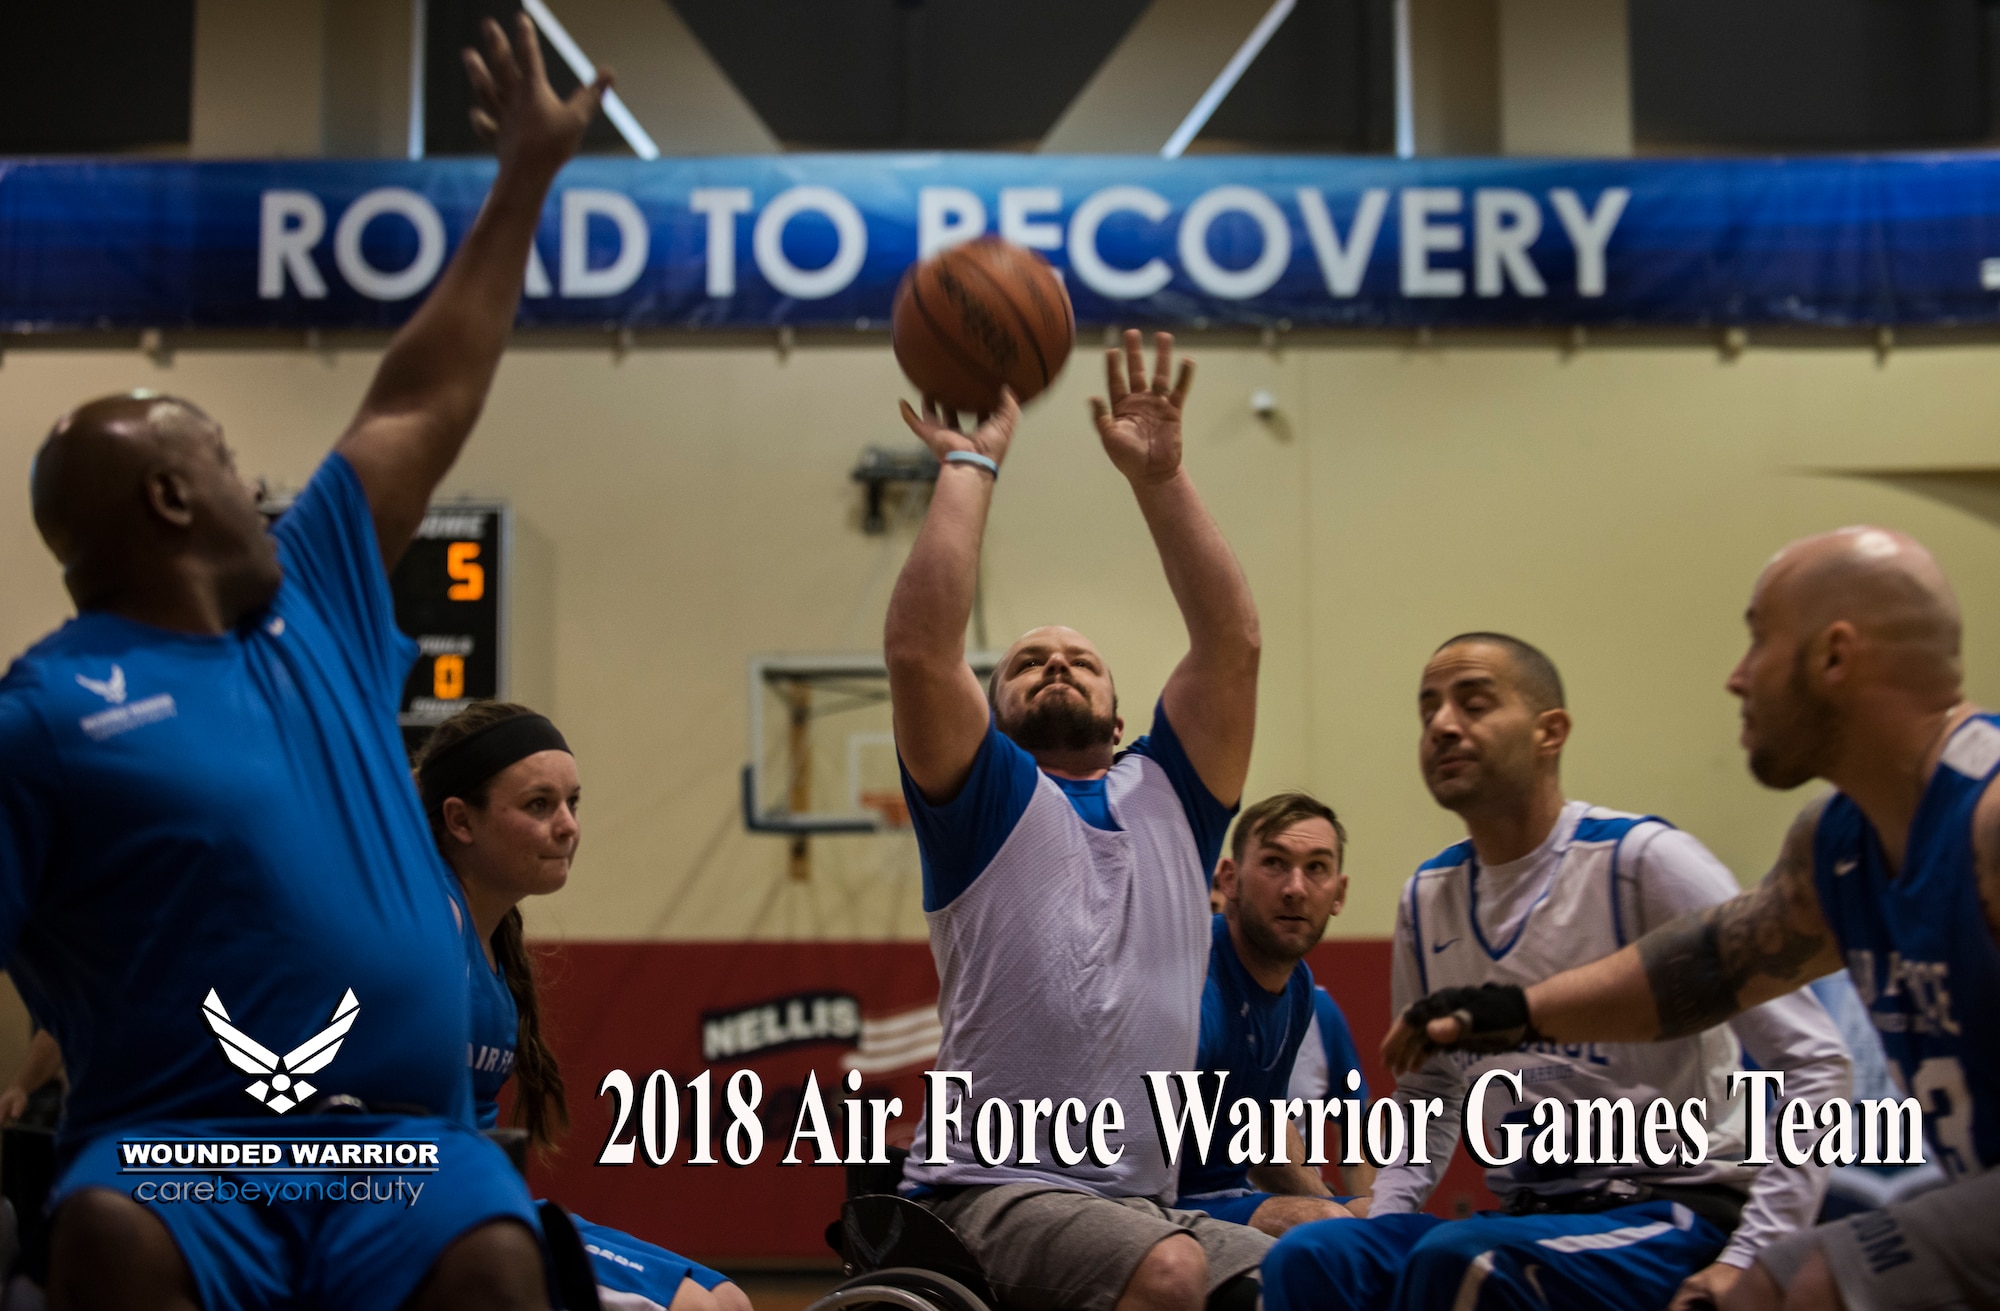 A competitor shoots while surrounded by defenders during the wheelchair basketball event in the 5th Annual Air Force Wounded Warrior Trials at the Warrior Fitness Center on Nellis Air Force Base, Nevada, Feb. 28, 2018.